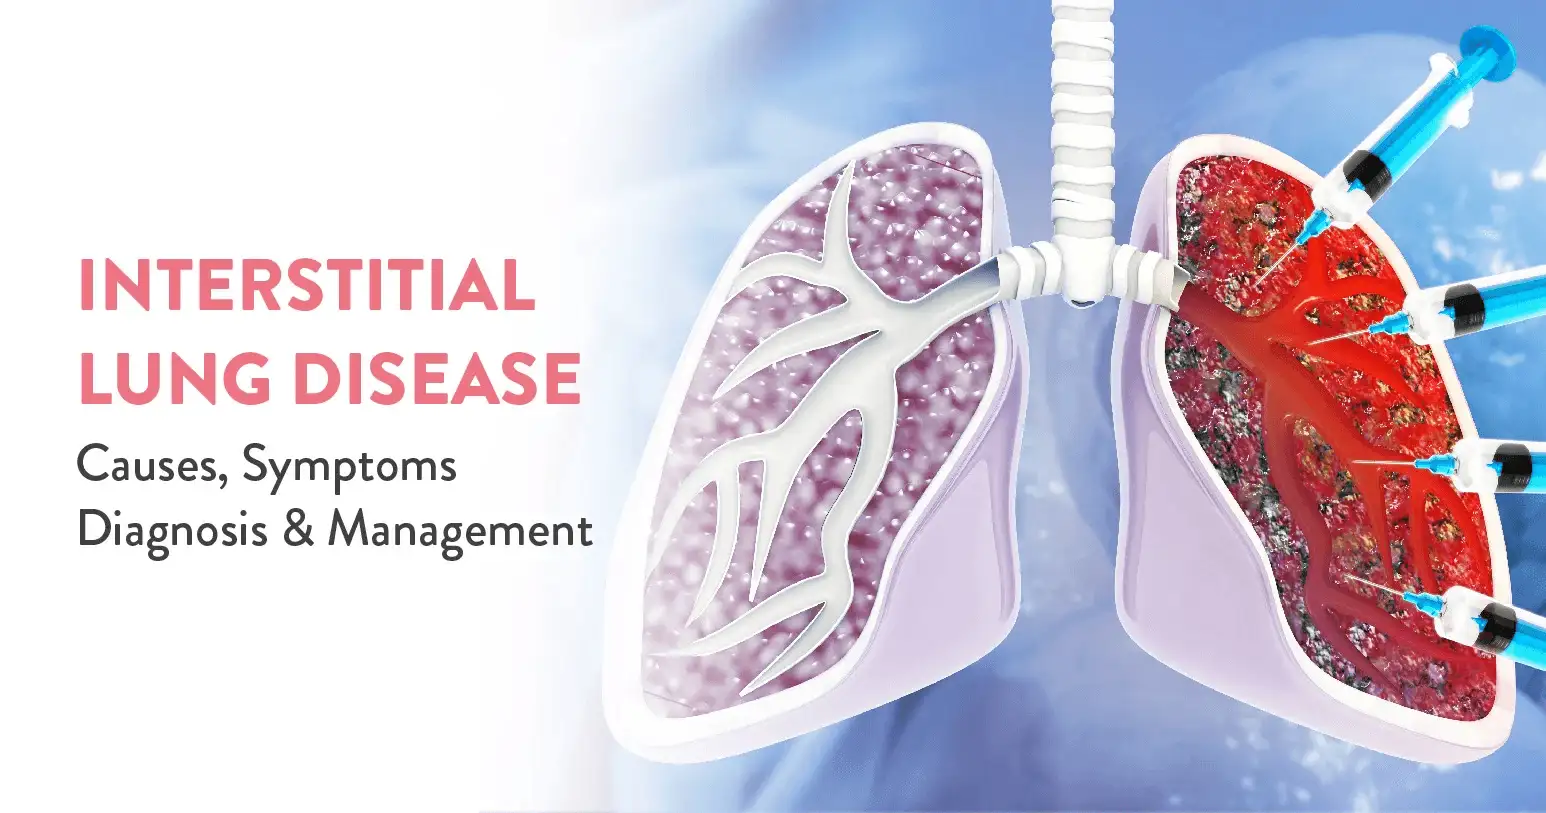 What is Interstitial Lung Disease